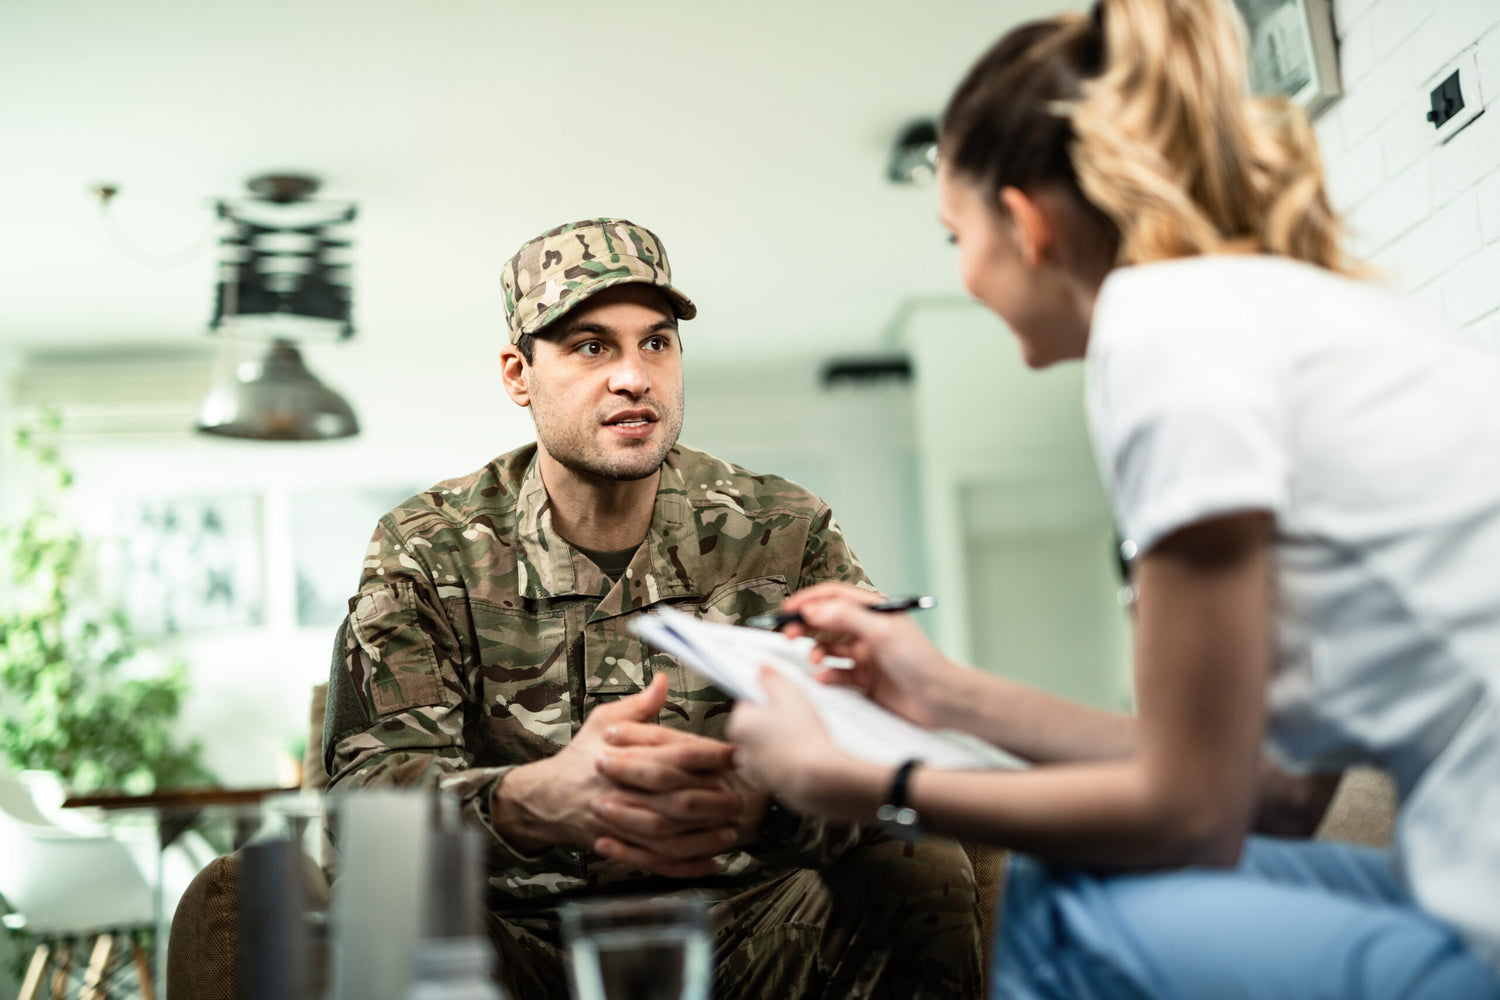 Michigan Grants $16 Million Towards Further Cannabis Research For Veterans With PTSD